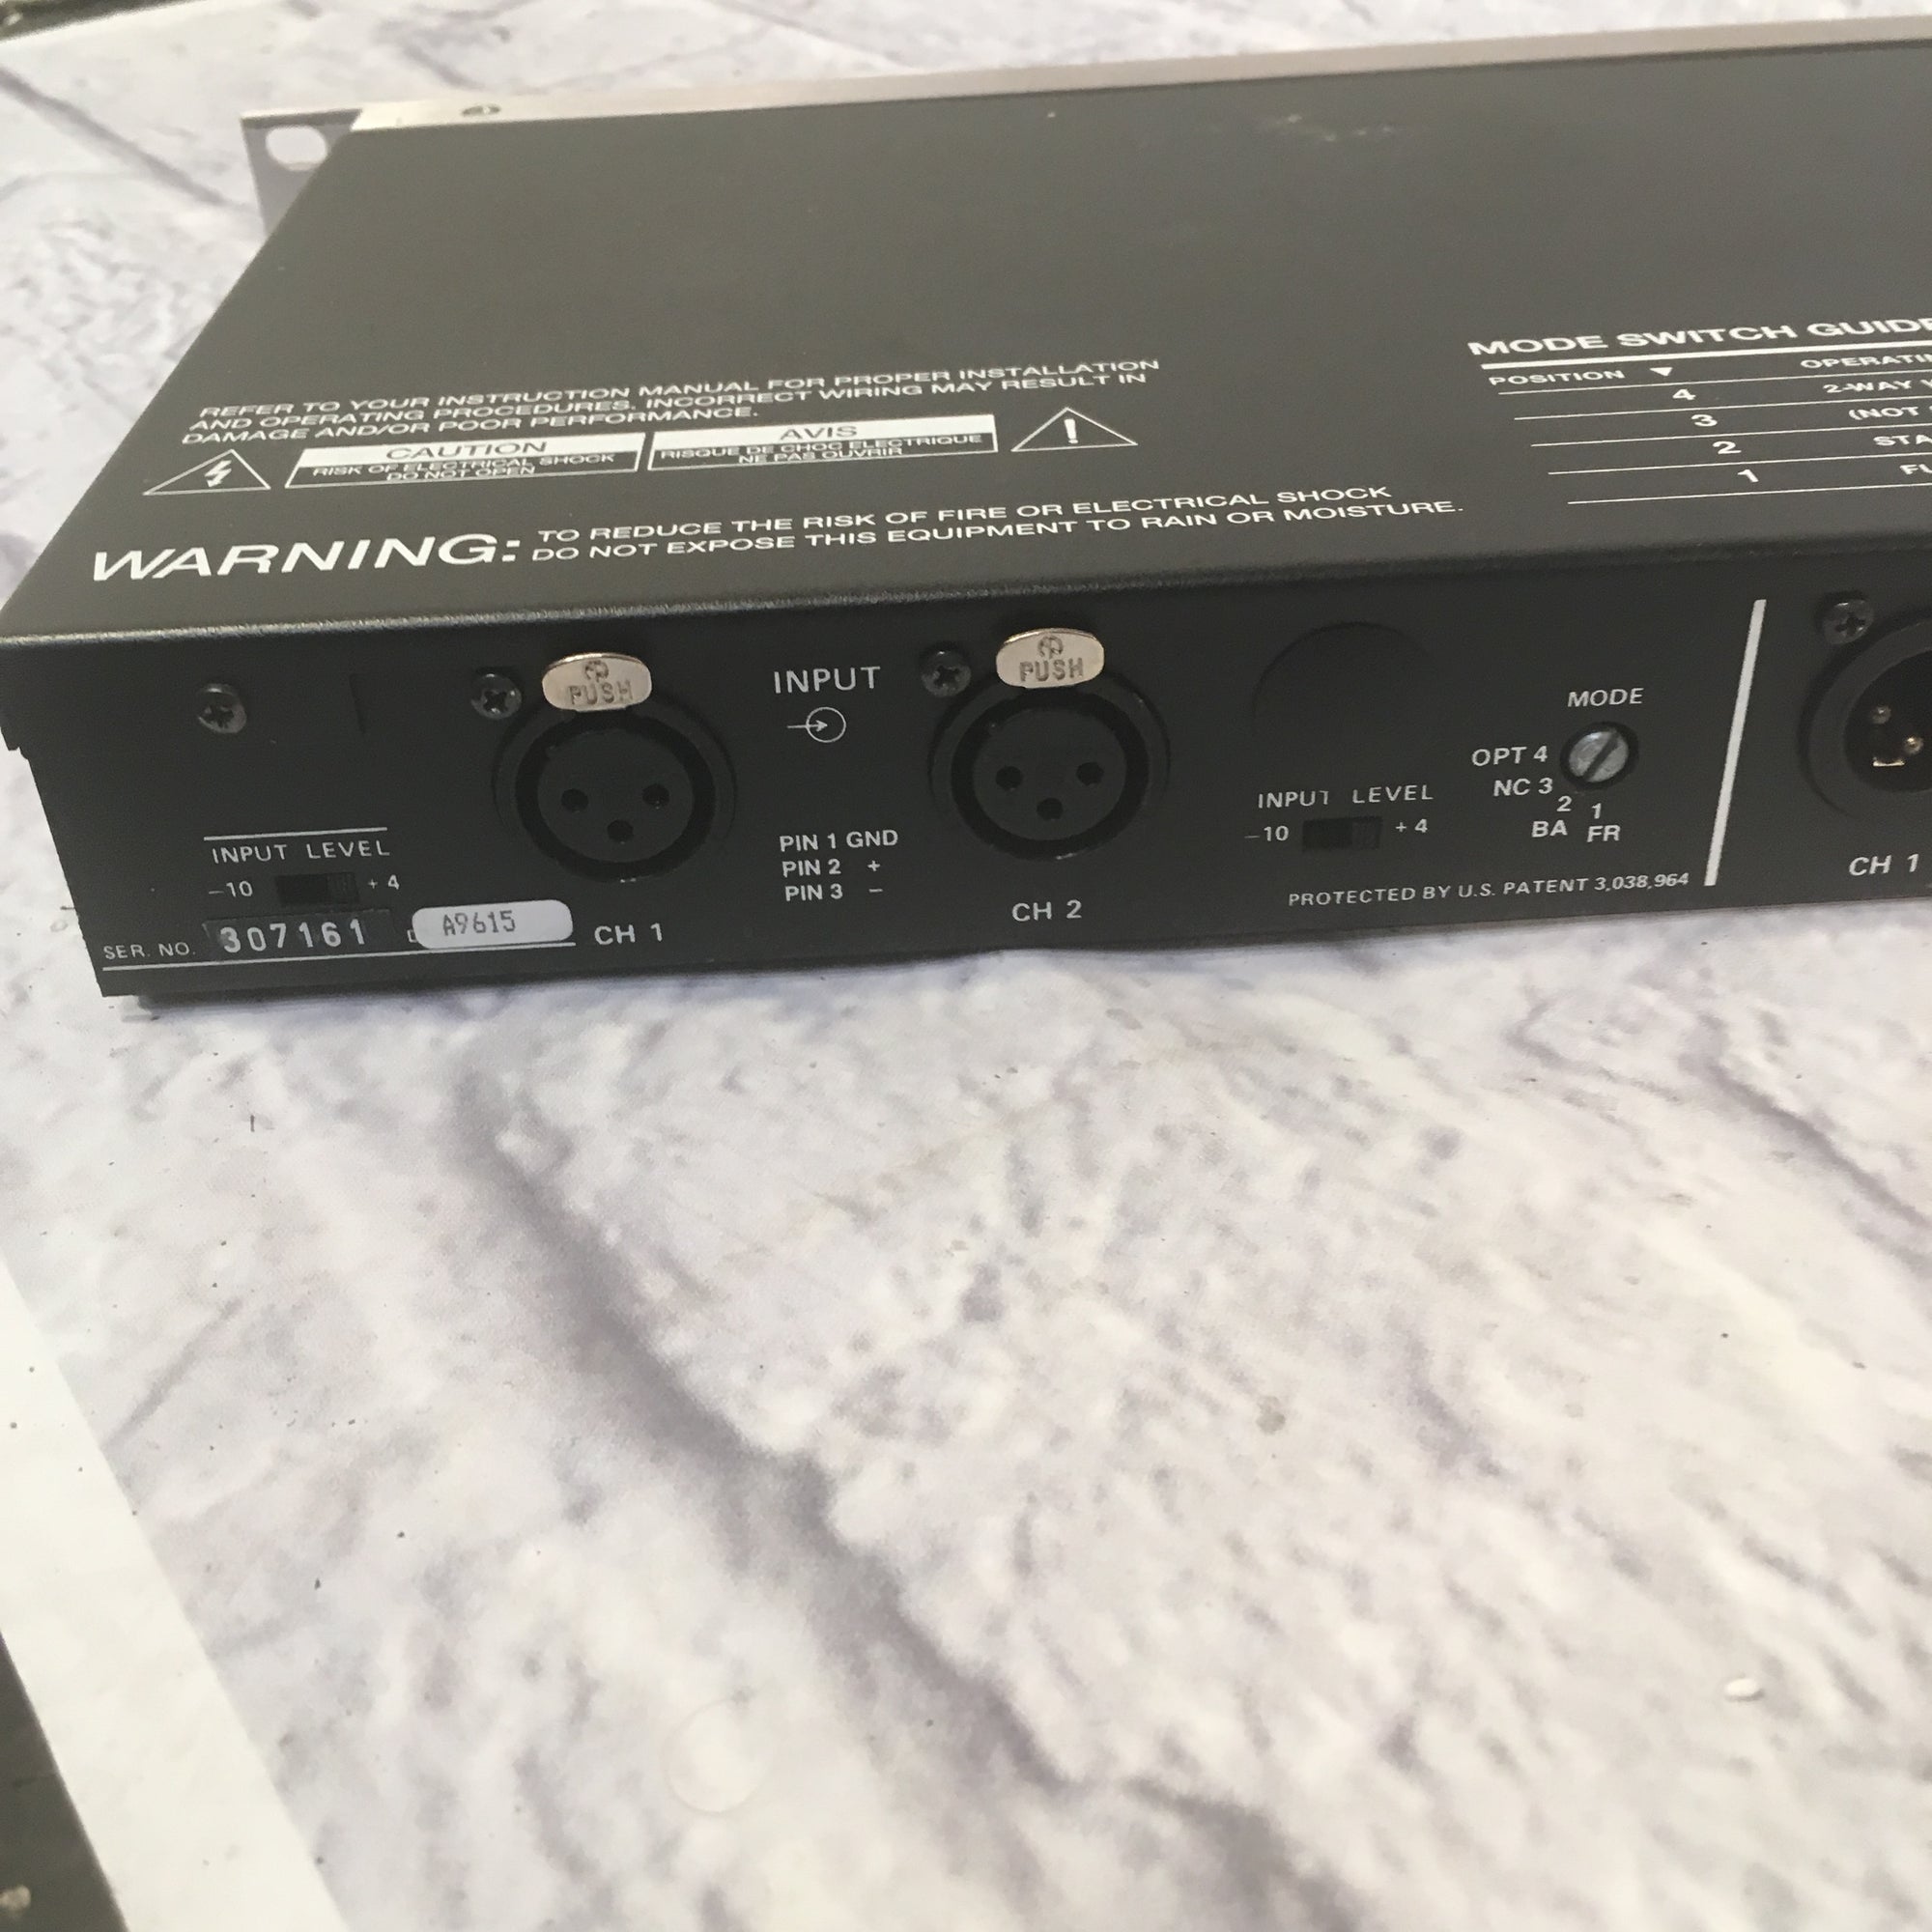 Bose 402-W with 402C Systems Controller Evolution Music